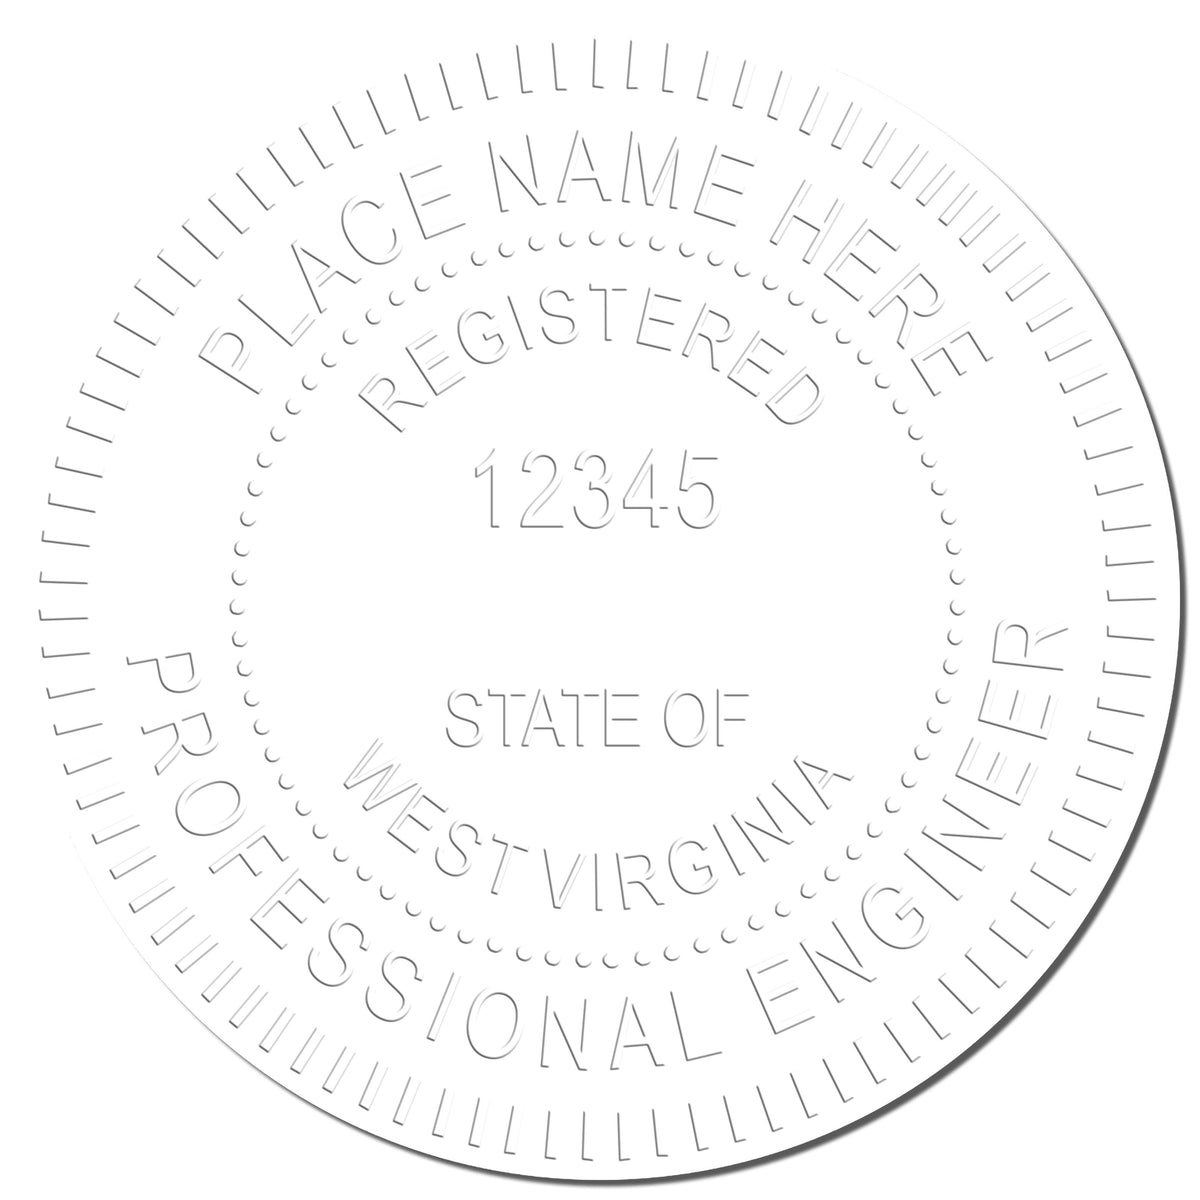 This paper is stamped with a sample imprint of the State of West Virginia Extended Long Reach Engineer Seal, signifying its quality and reliability.